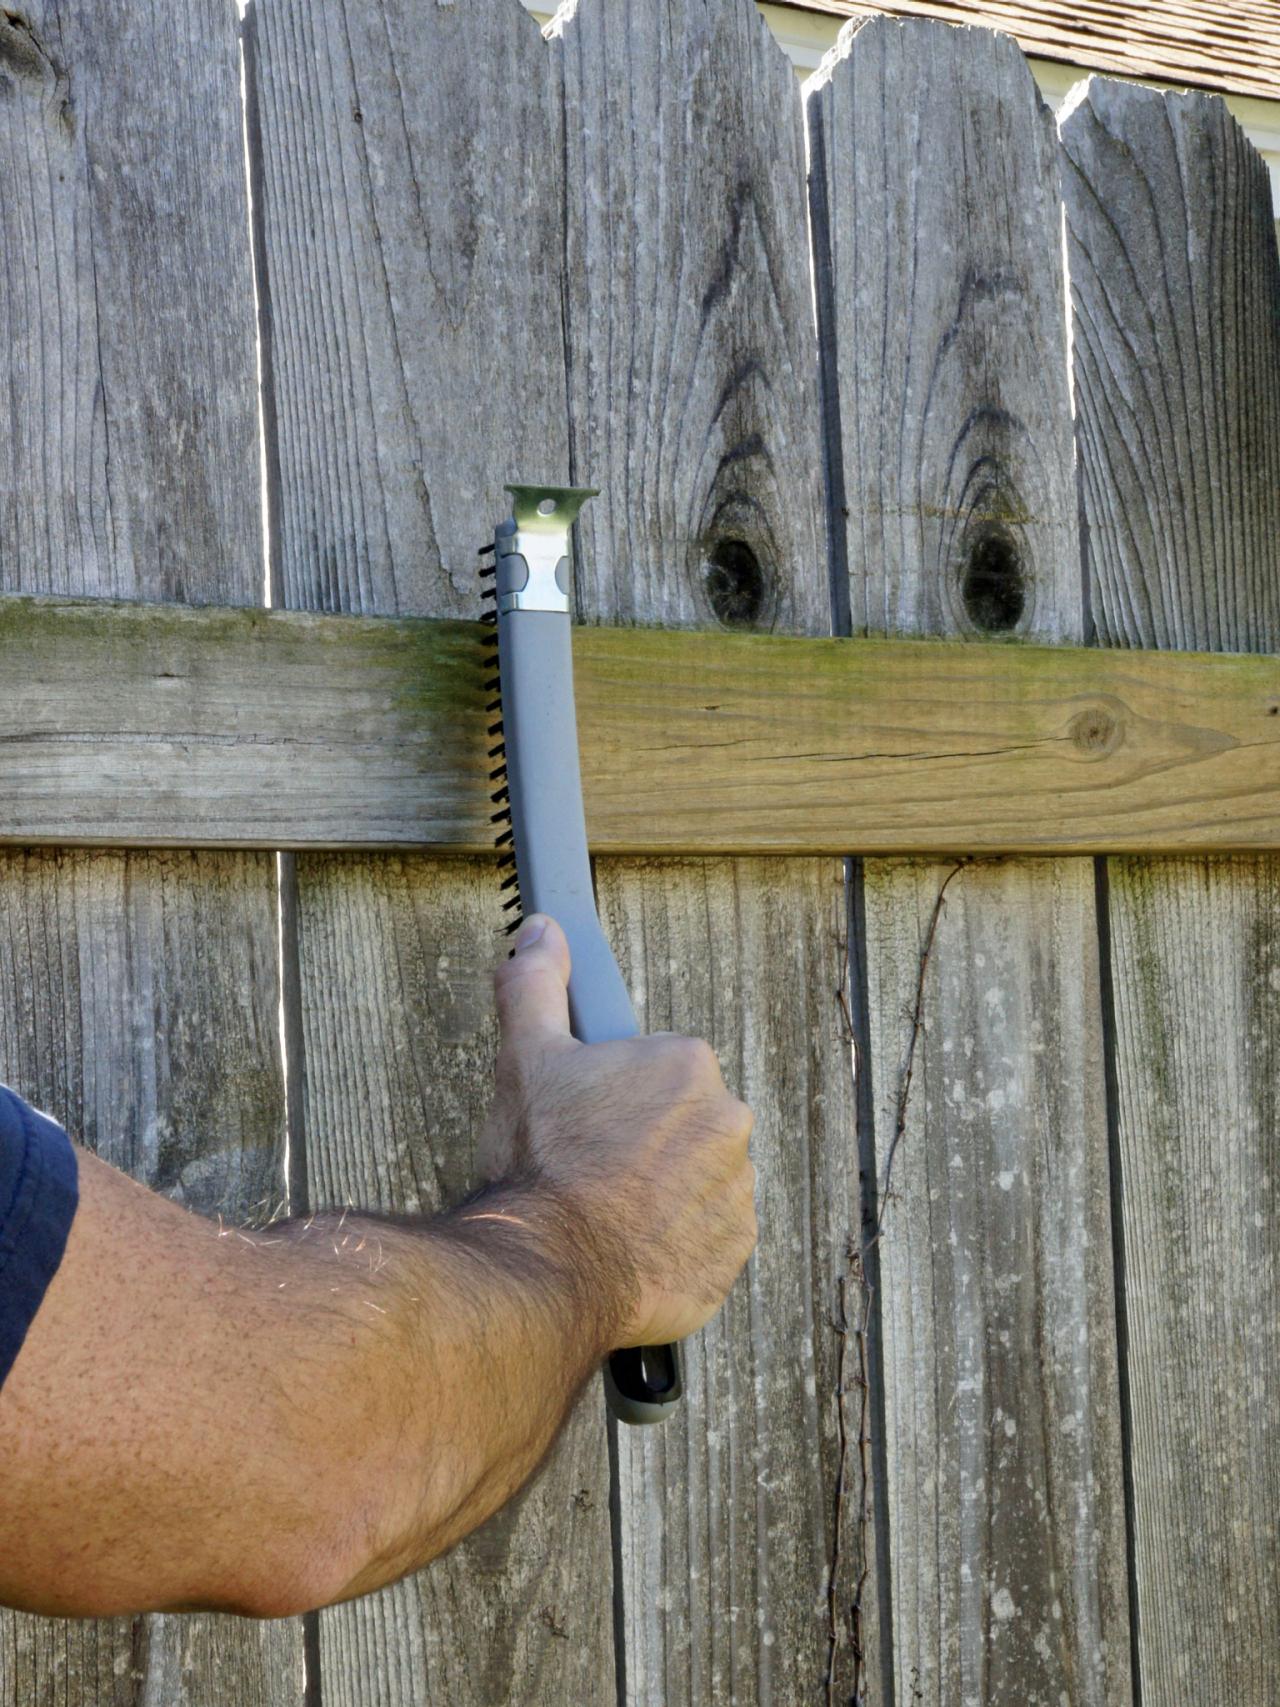 How To Paint A Fence Wood Fence Painting and Staining Instructions and Tips | HGTV